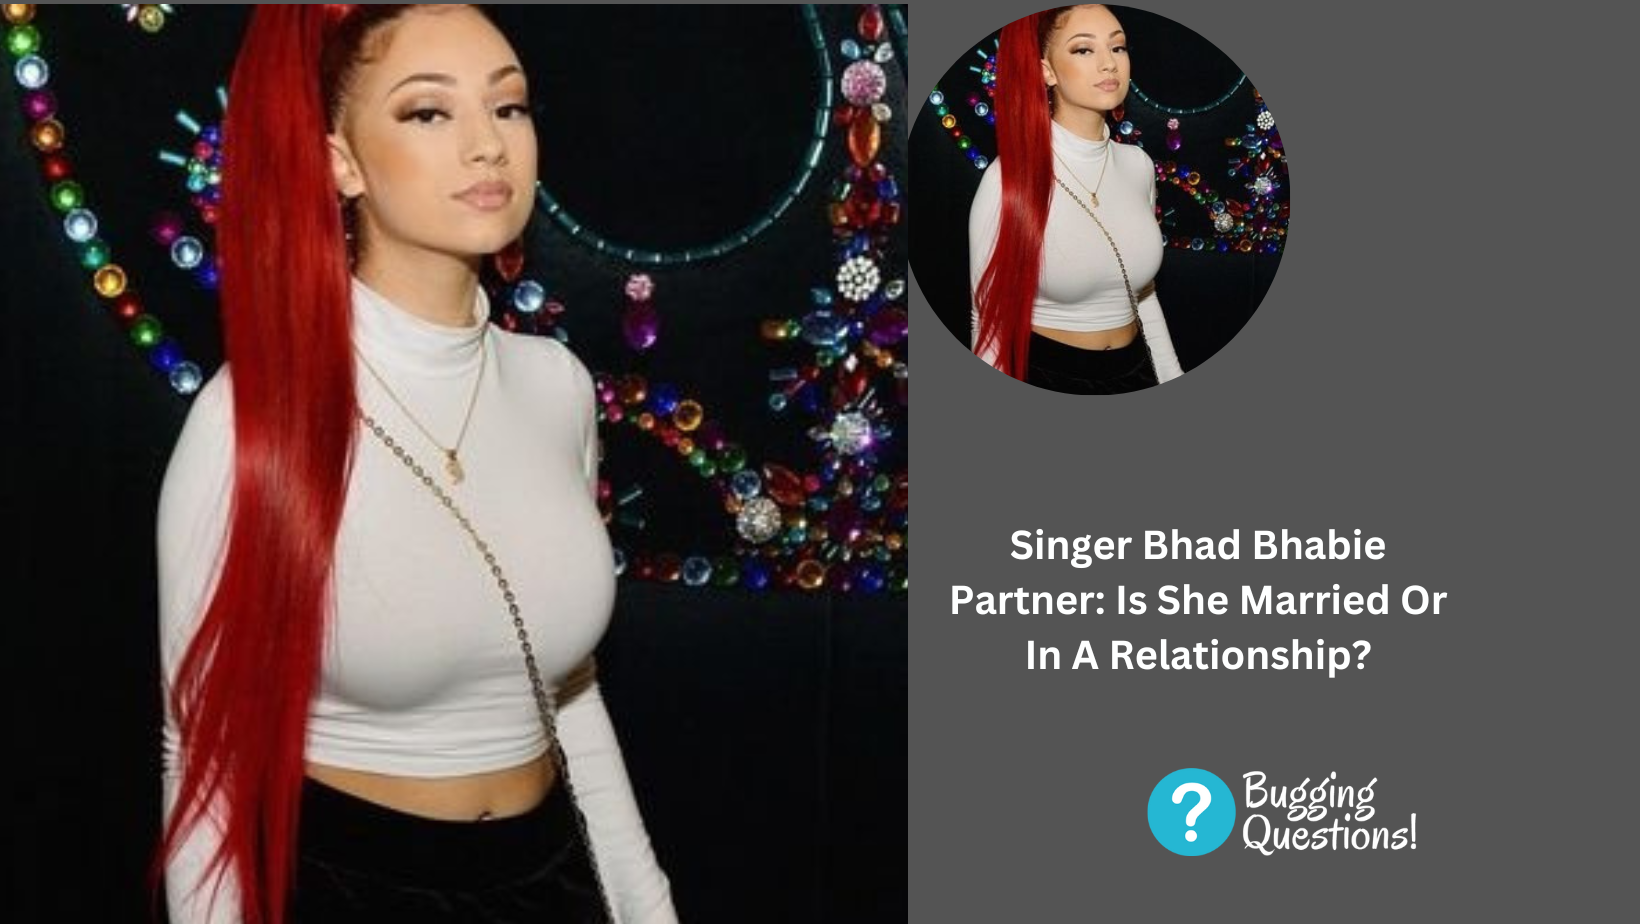 Singer Bhad Bhabie Partner: Is She Married Or In A Relationship?